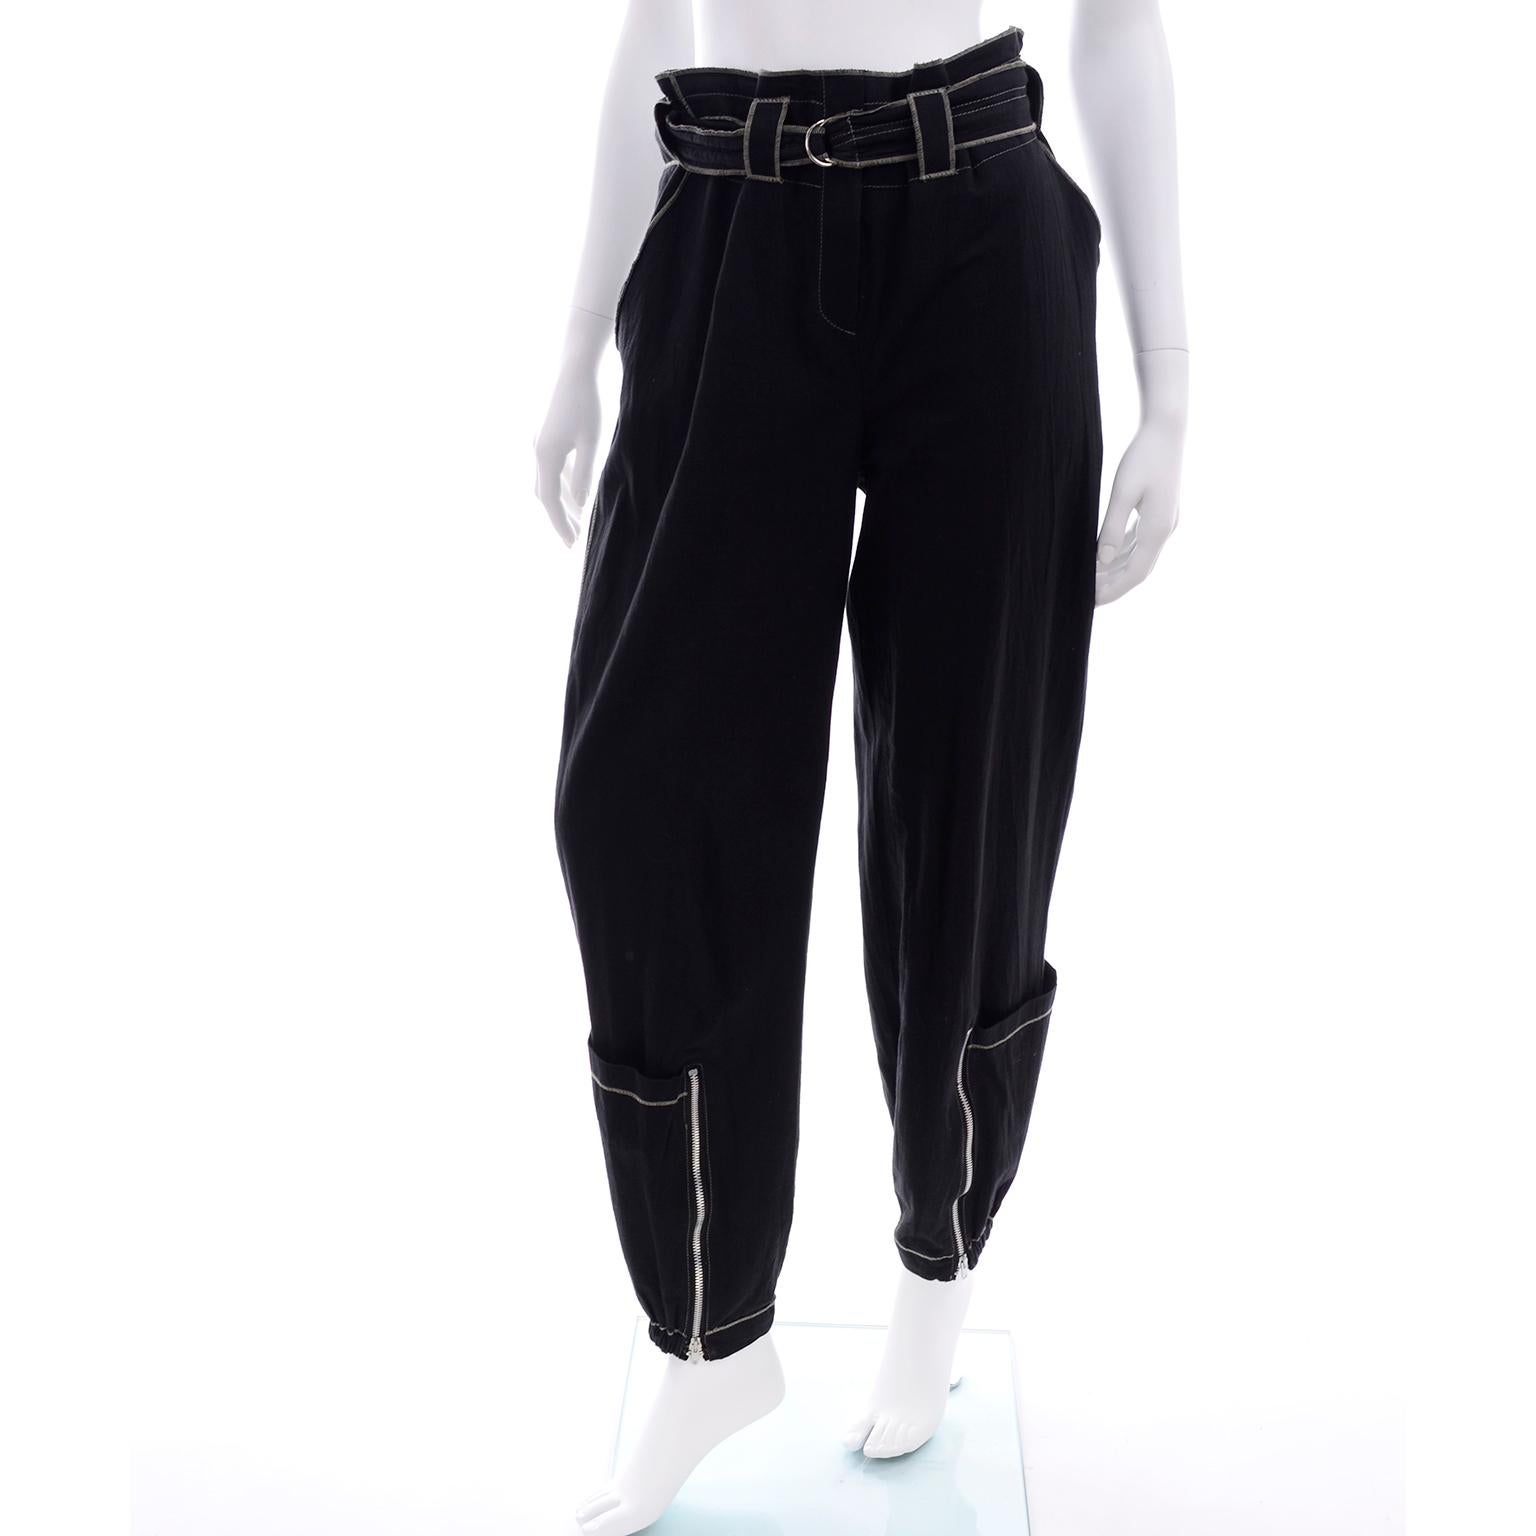 Theodore Vintage Avant Garde 2 pc Black Pants & Tank Top Outfit w topstitching 7